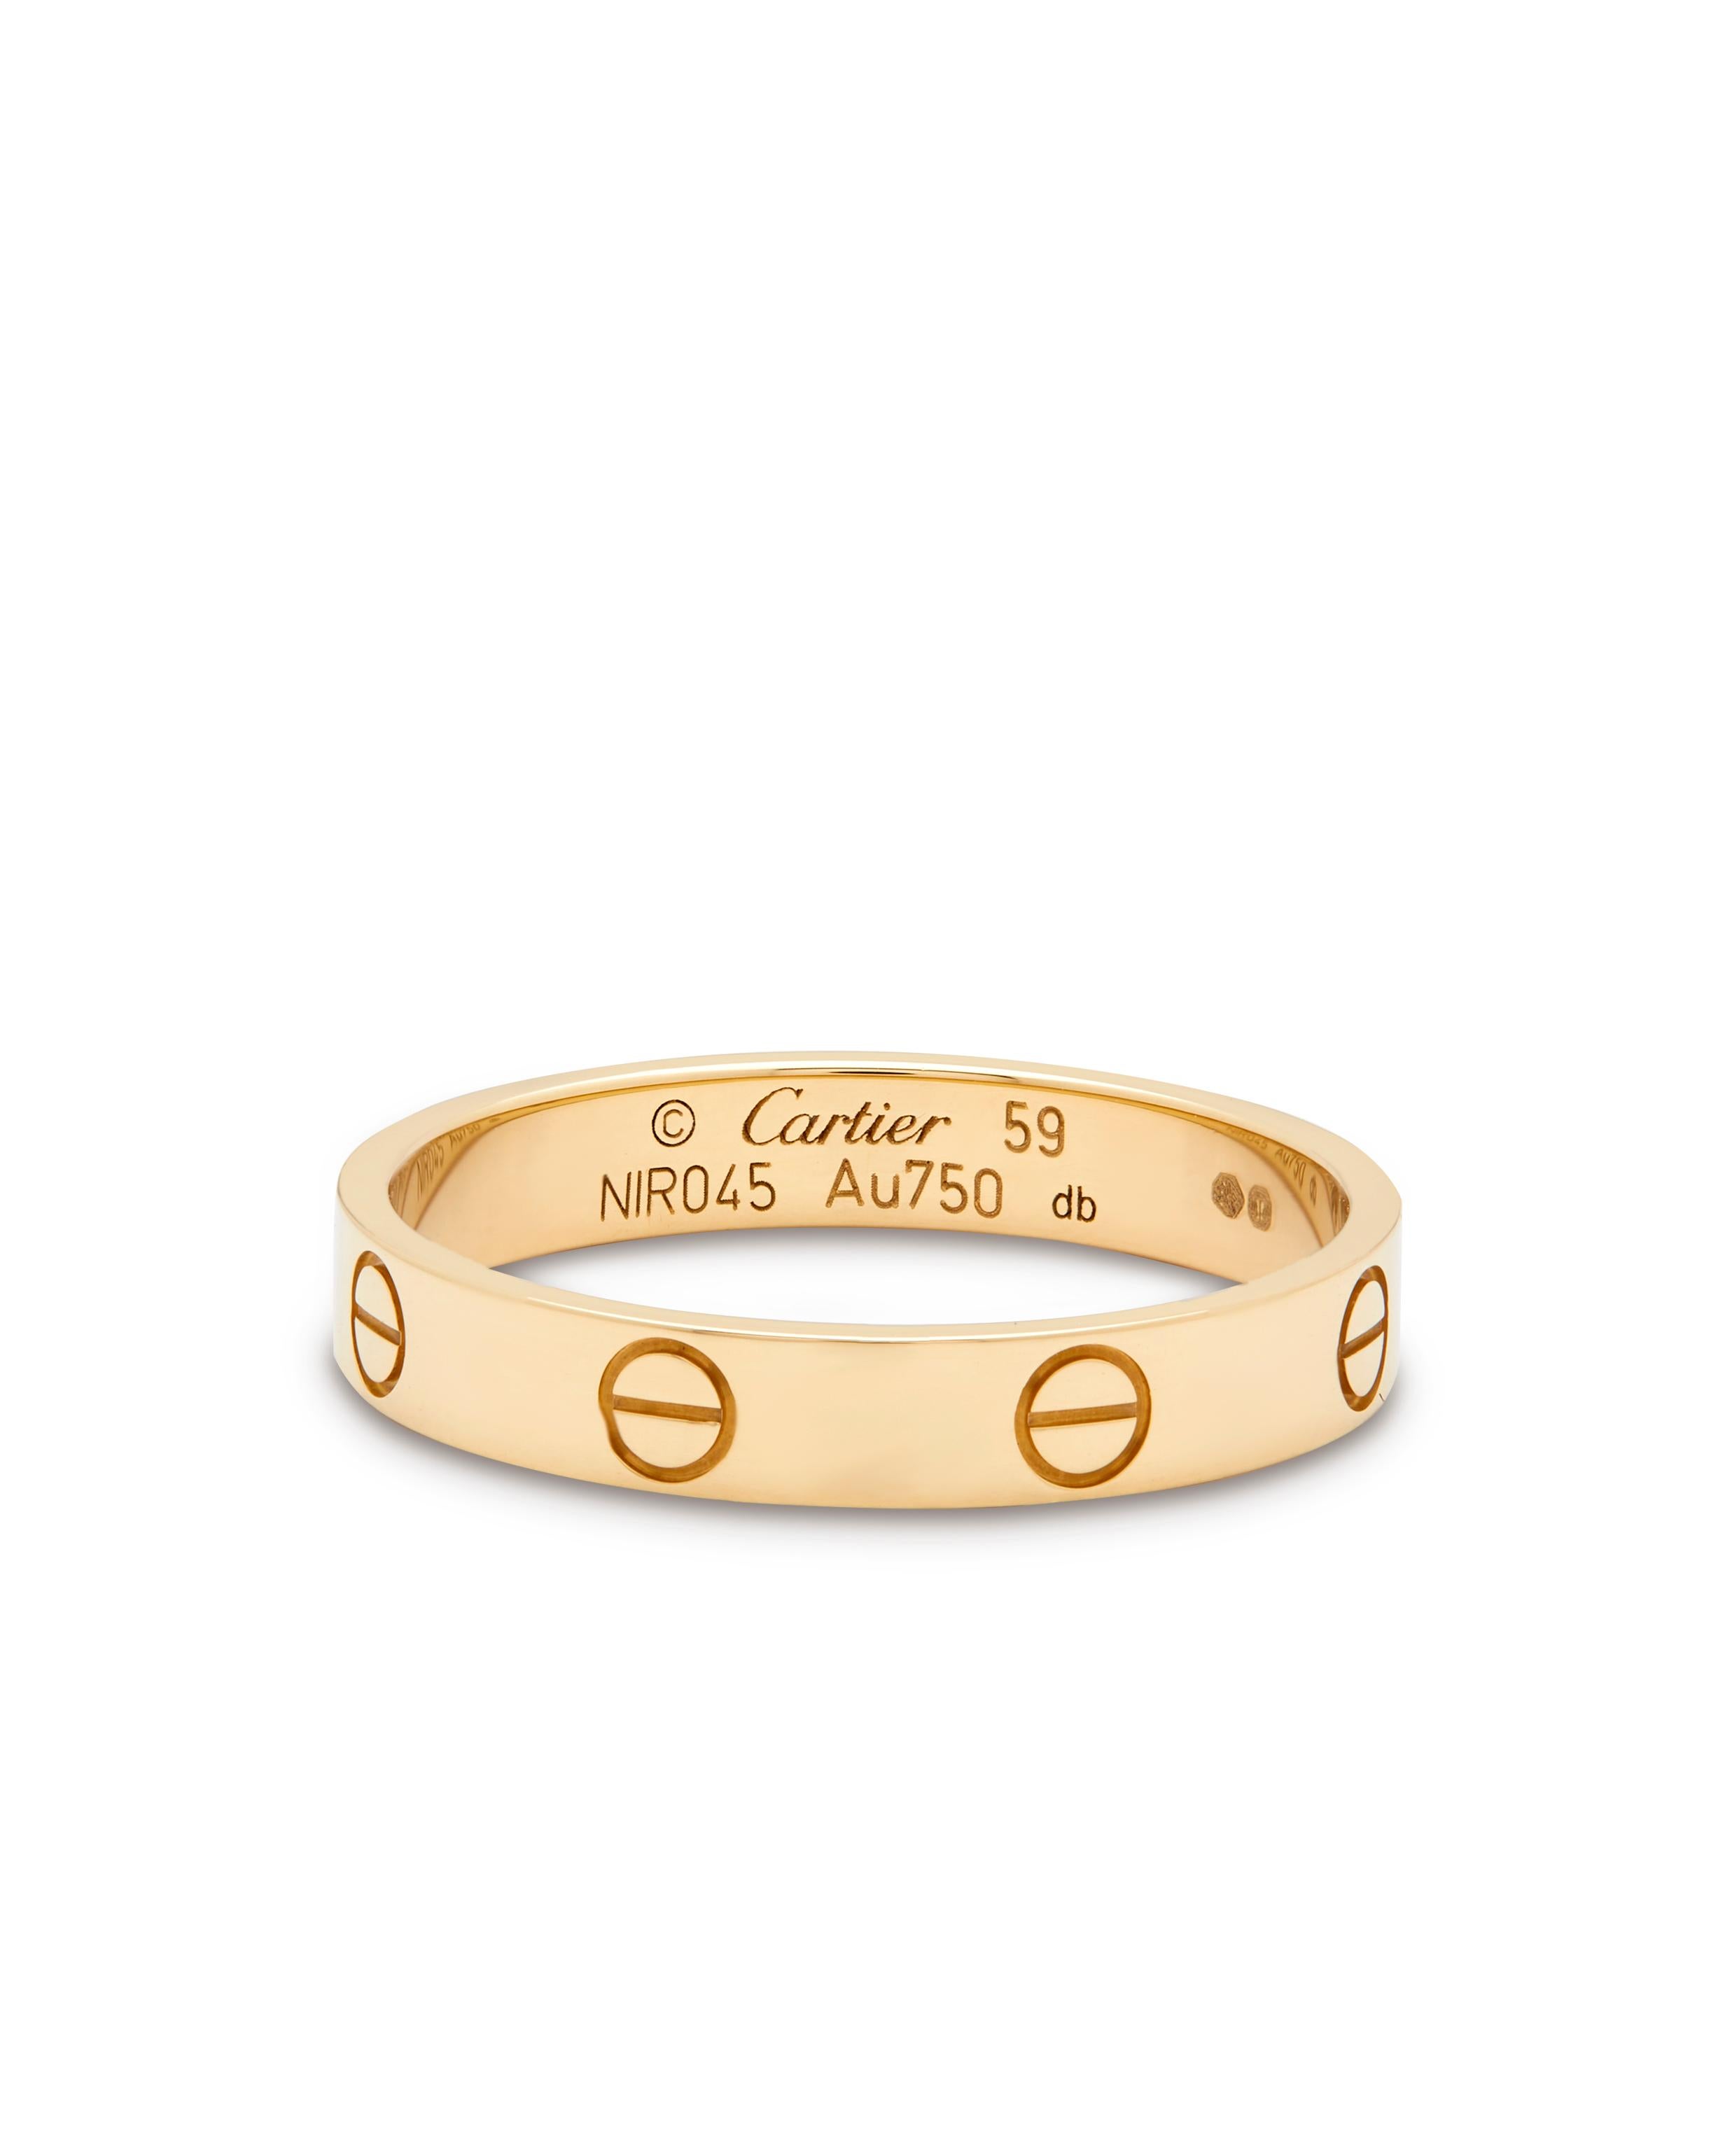 Cartier’s Iconic Love ring.

A symbol of inspired Love, and a must have for a discerning jewellery buyer. Perfect Gift to open in that beautiful red iconic box.  

Signed Cartier:
Stamped with makers marks 
Model number: B4085059
Serial number: